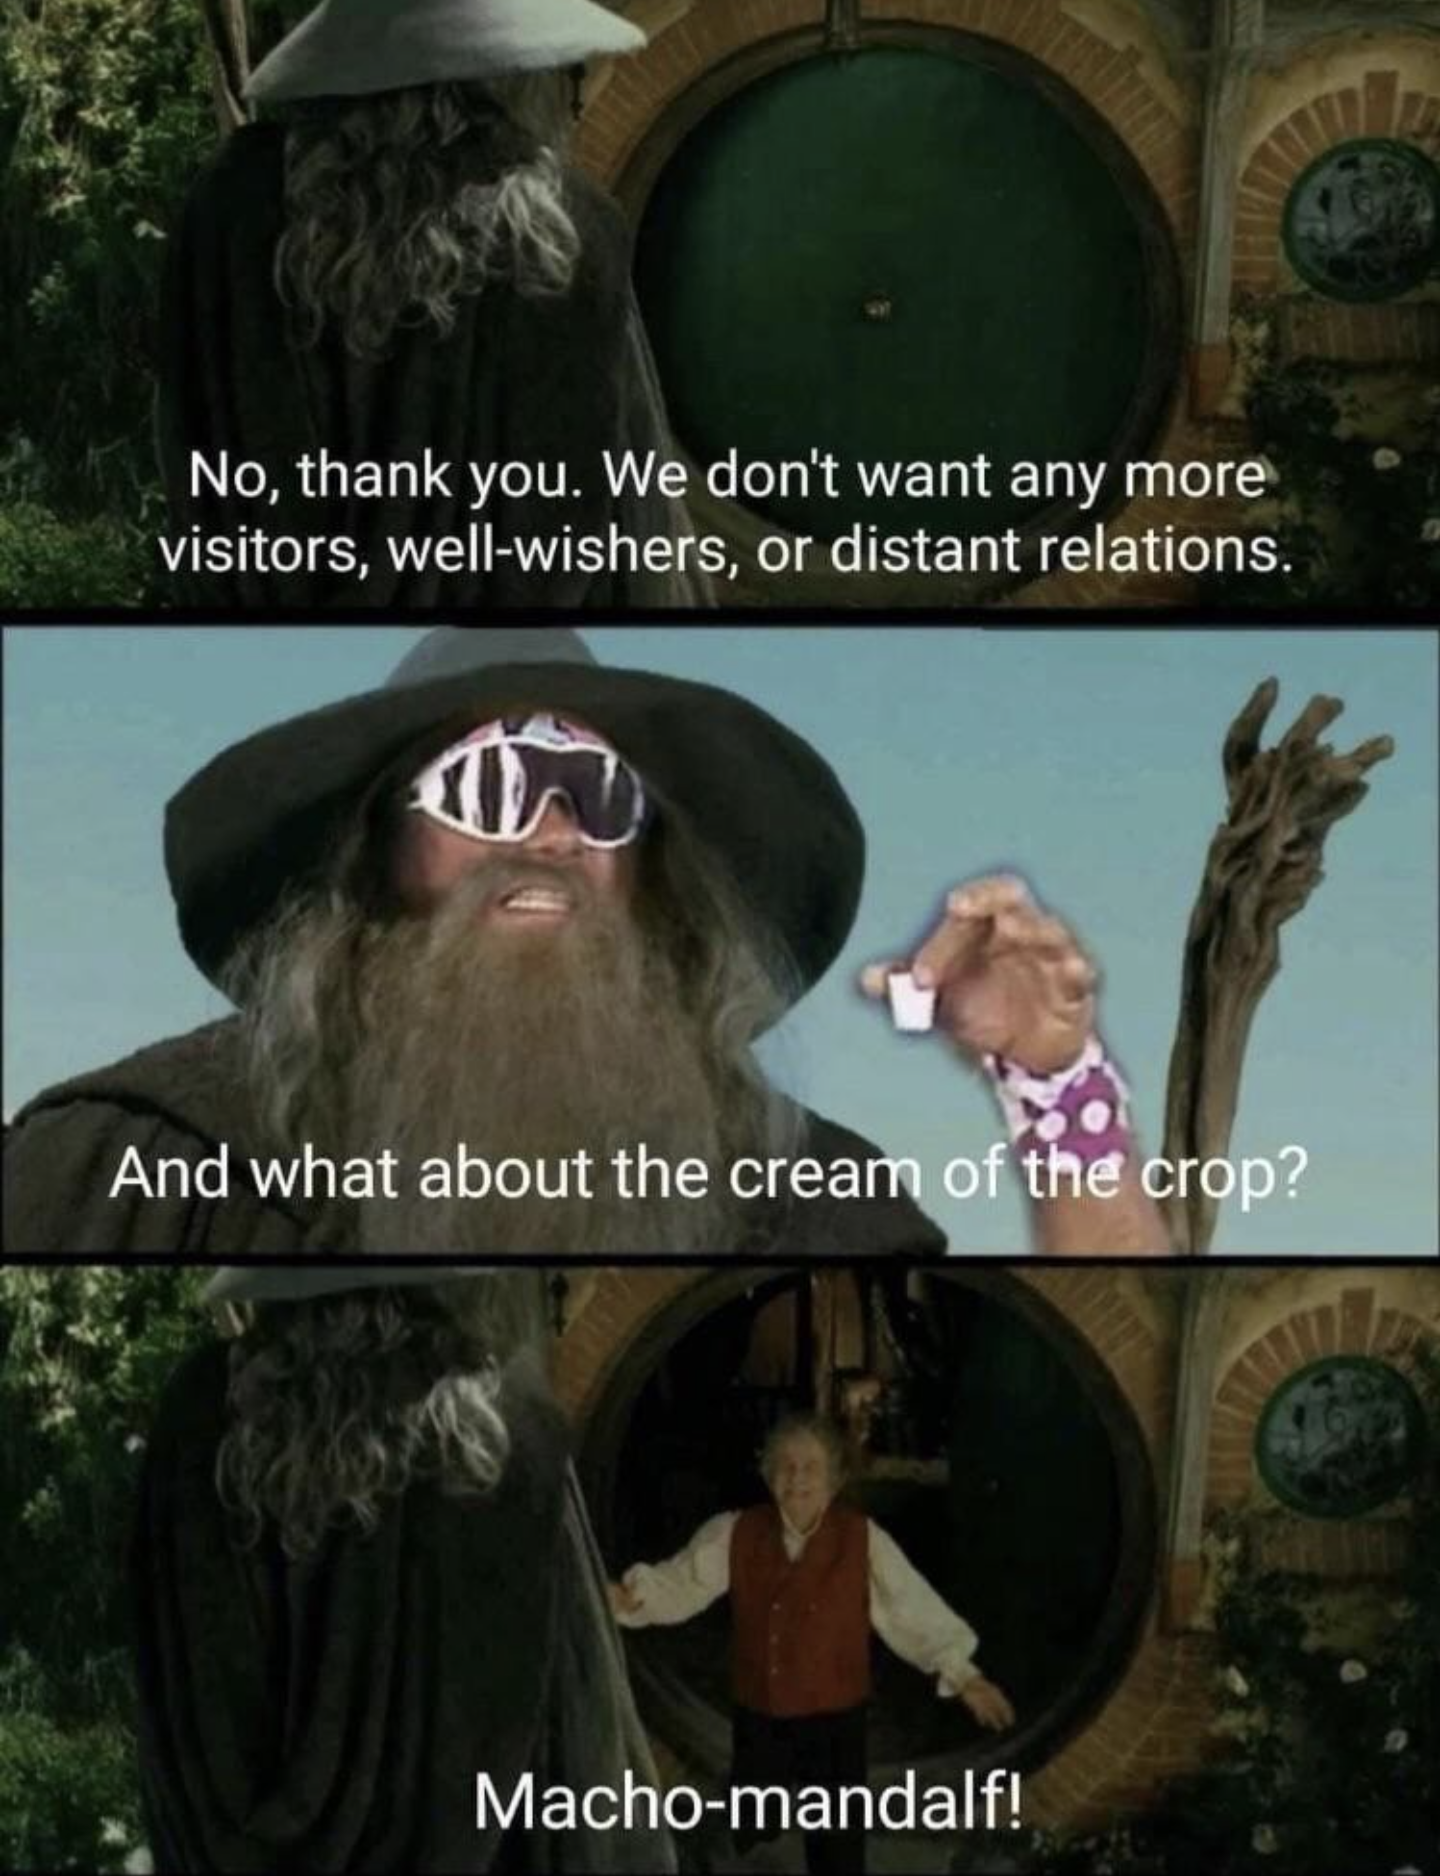 funny memes - we don t want any more well wishers - Hd No, thank you. We don't want any more visitors, wellwishers, or distant relations. And what about the cream of the crop? Machomandalf!